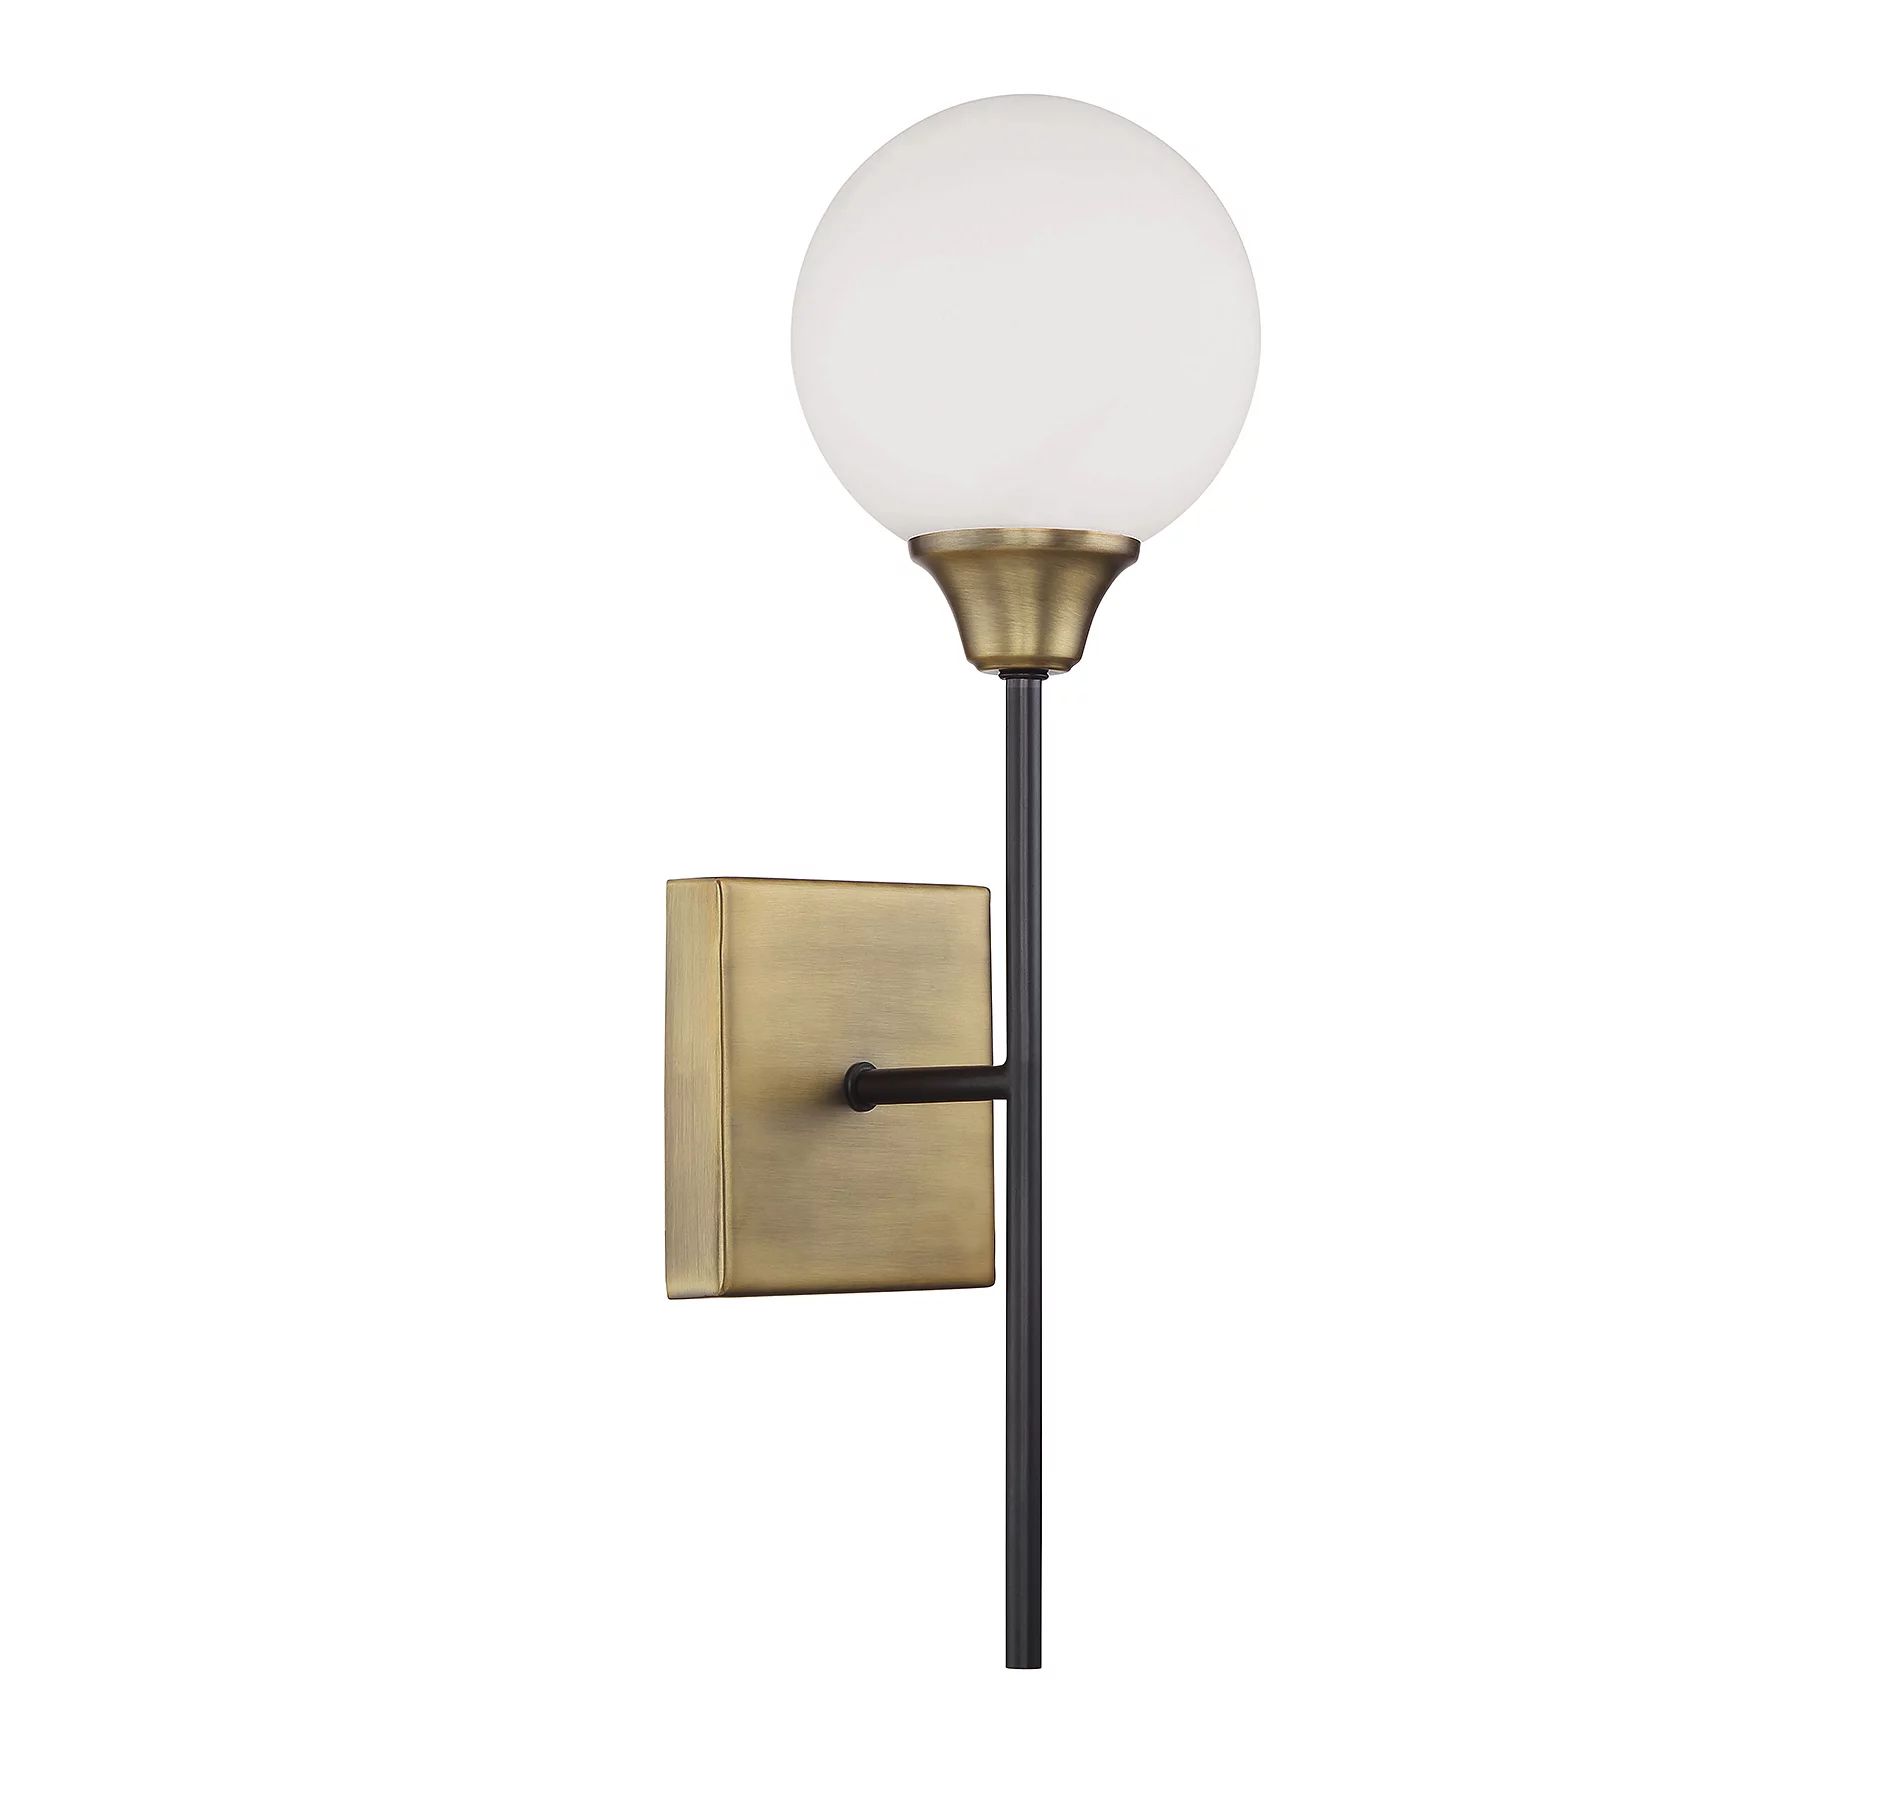 Trade Winds Lighting 1 Light Wall Sconce In English Bronze And Warm Brass - TW021658-79 | Walmart (US)